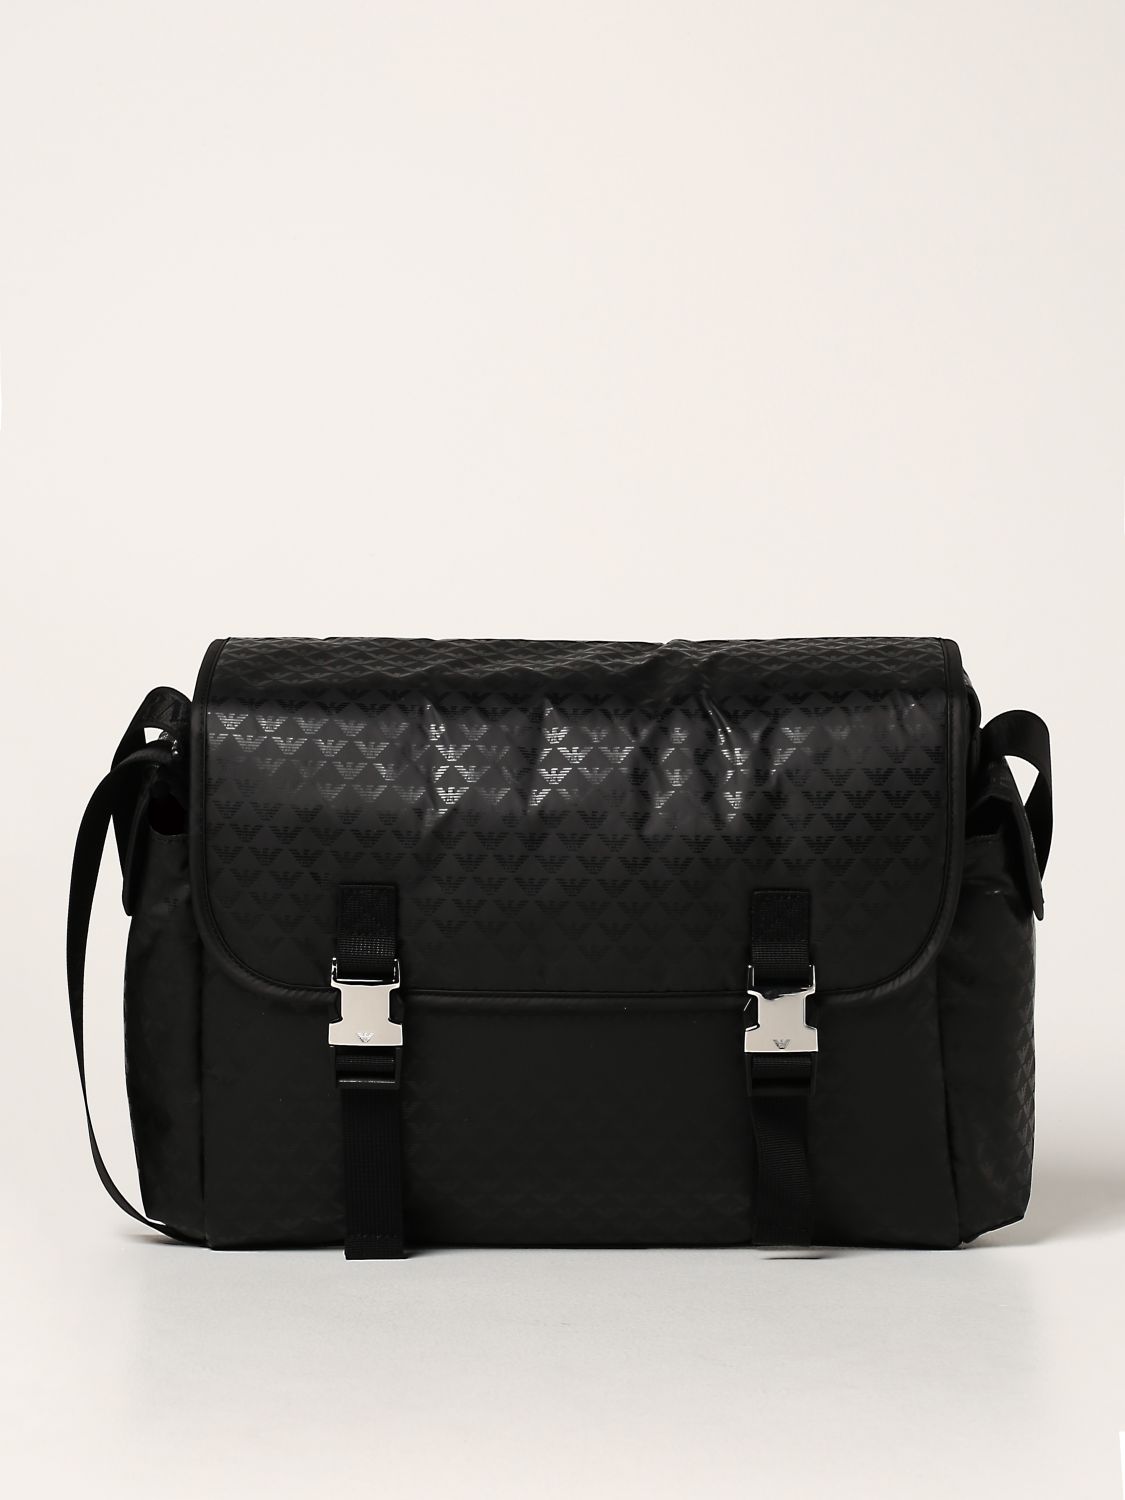 Emporio Armani Baby 3 Piece Changing Bag In Black | Childsplay Clothing